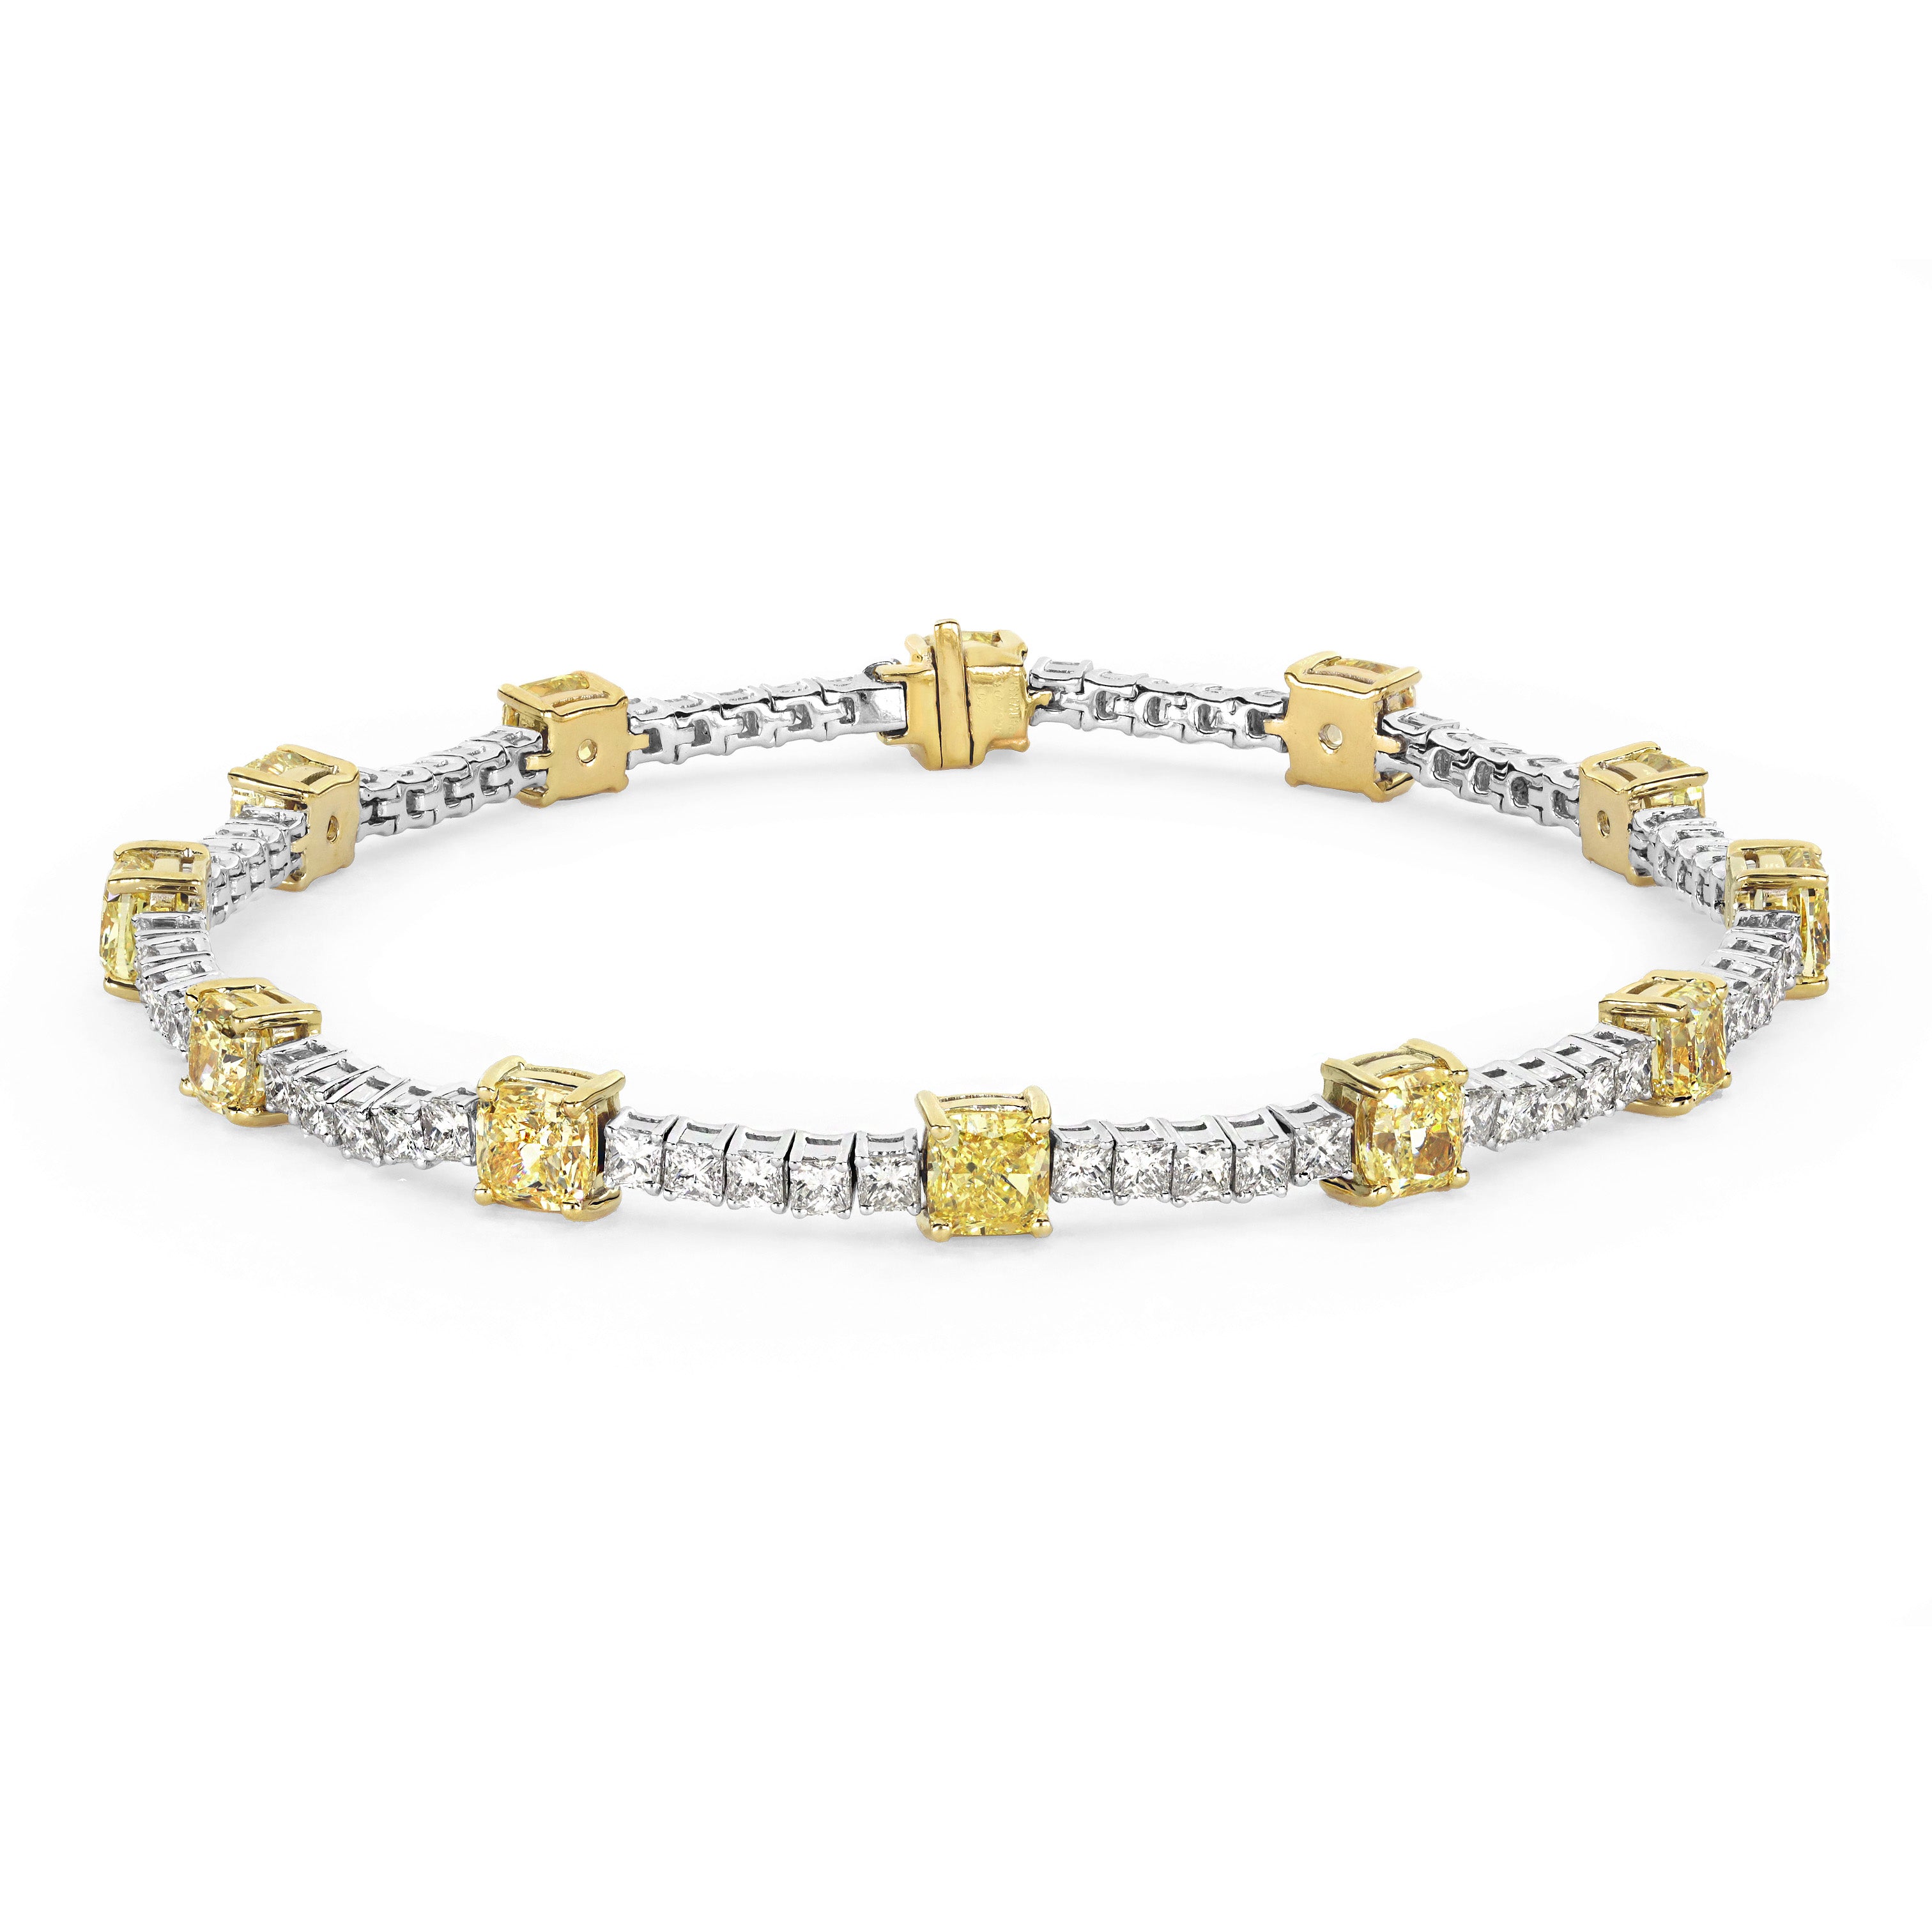 Shimansky - Yellow Diamond Fancy Tennis Bracelet 6.80ct crafted in 18K White Gold